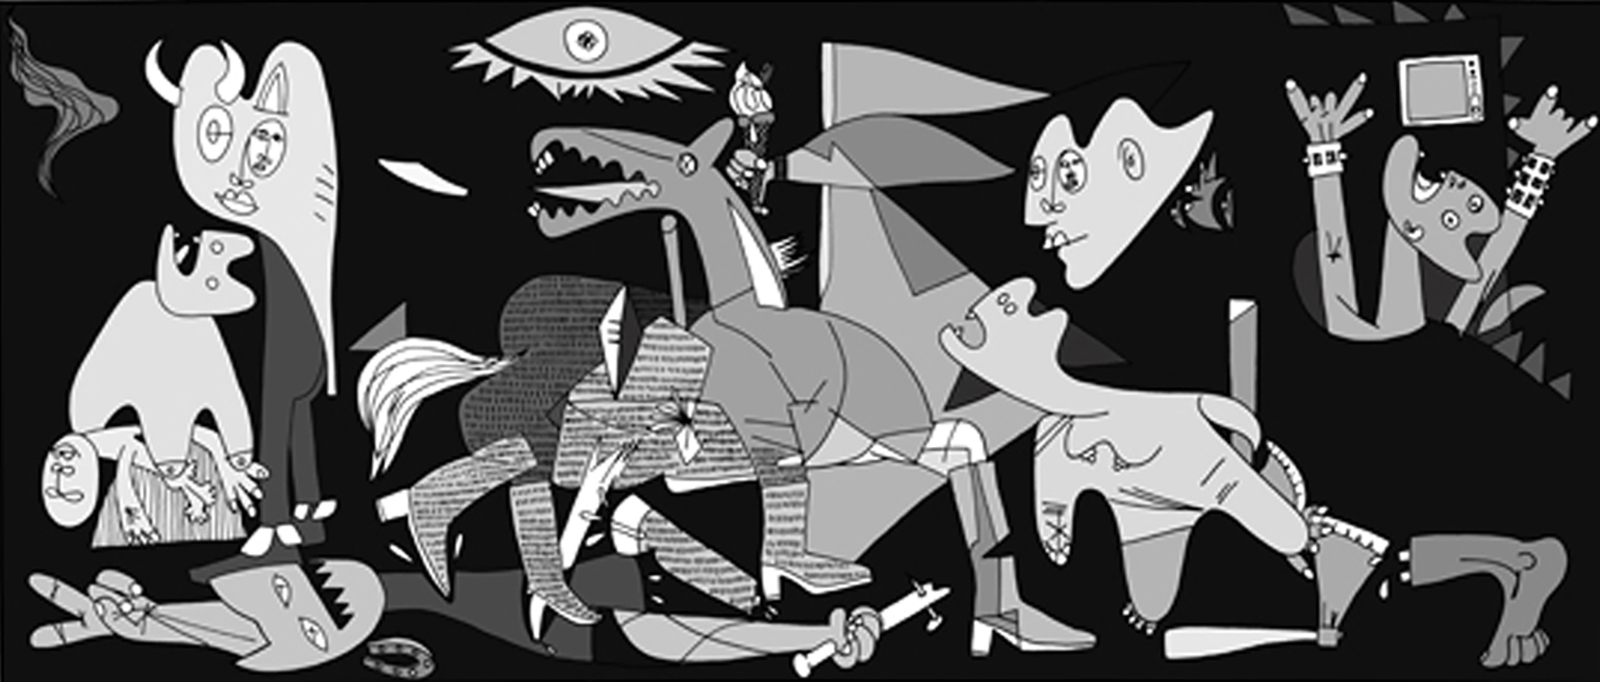 Guernica by Pablo Picachu